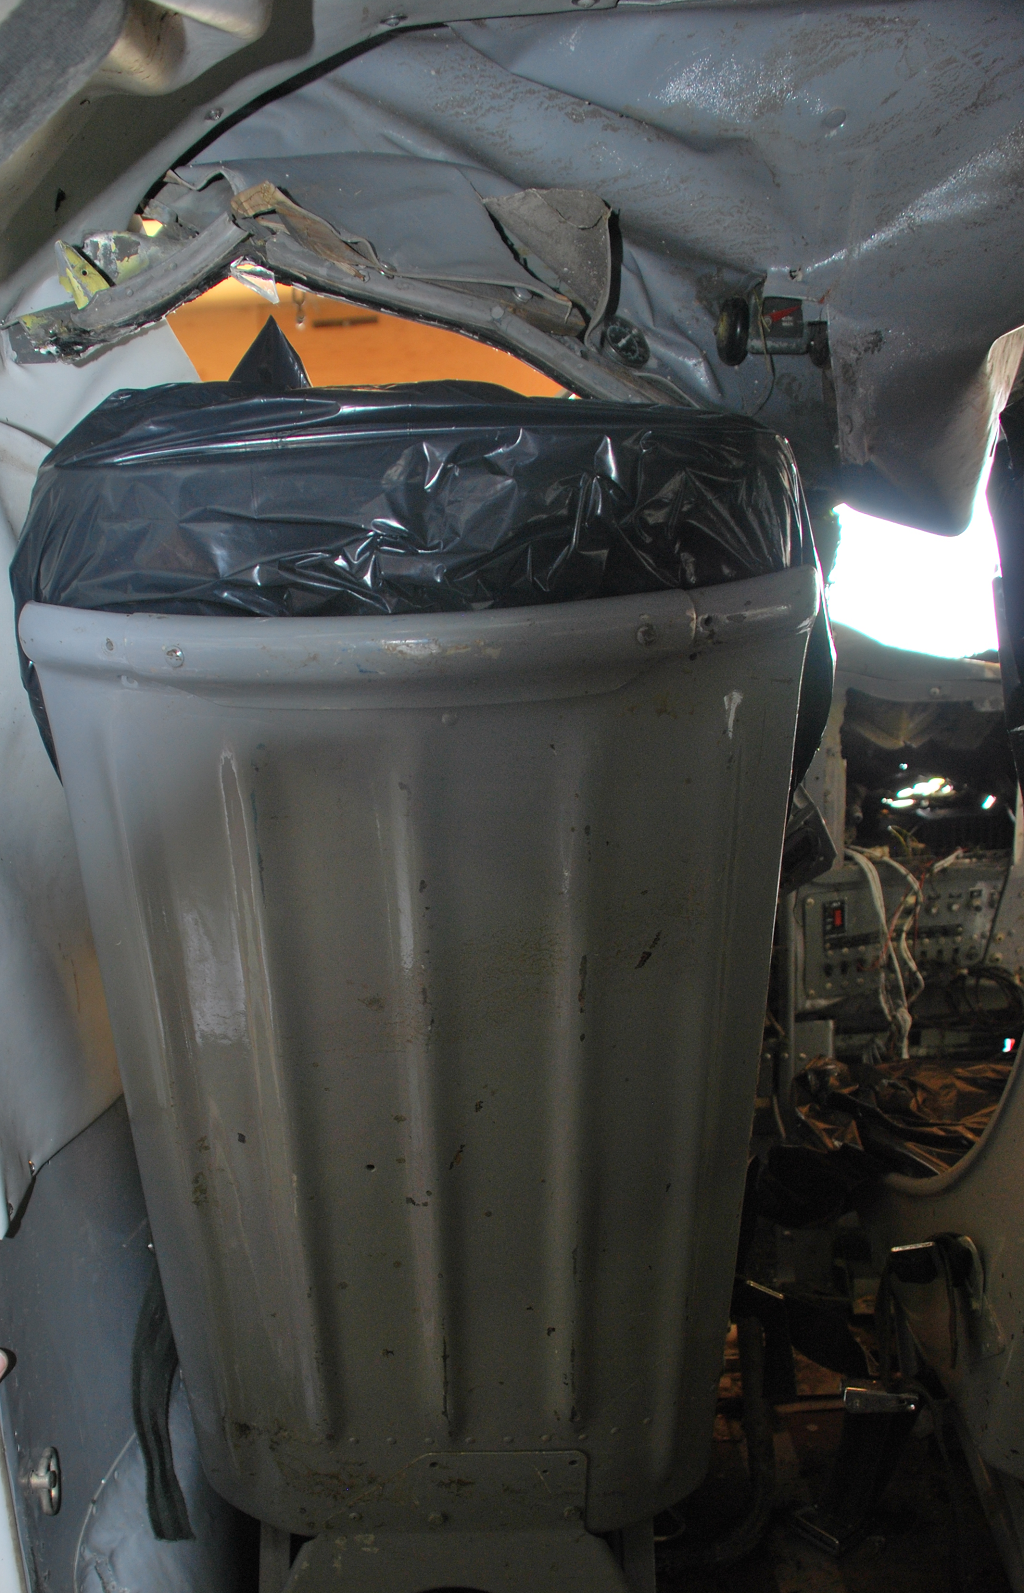 C-FGBF pilot seat after the accident